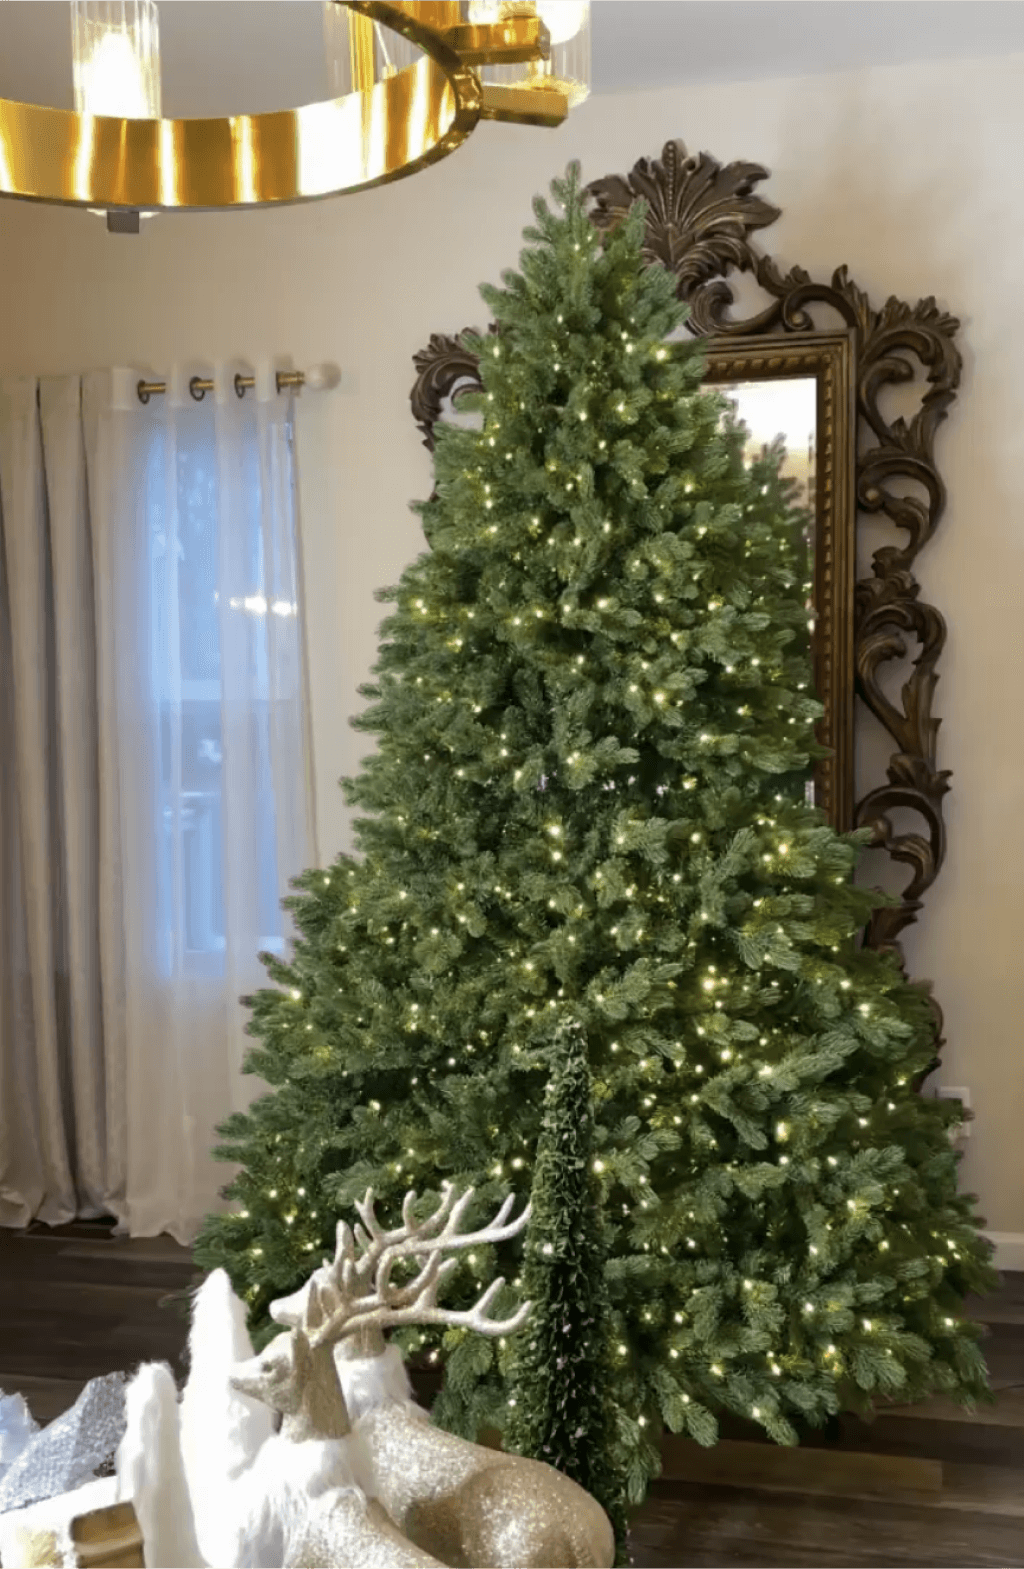 King of Christmas 6.5' Cypress Spruce Artificial Christmas Tree Unlit